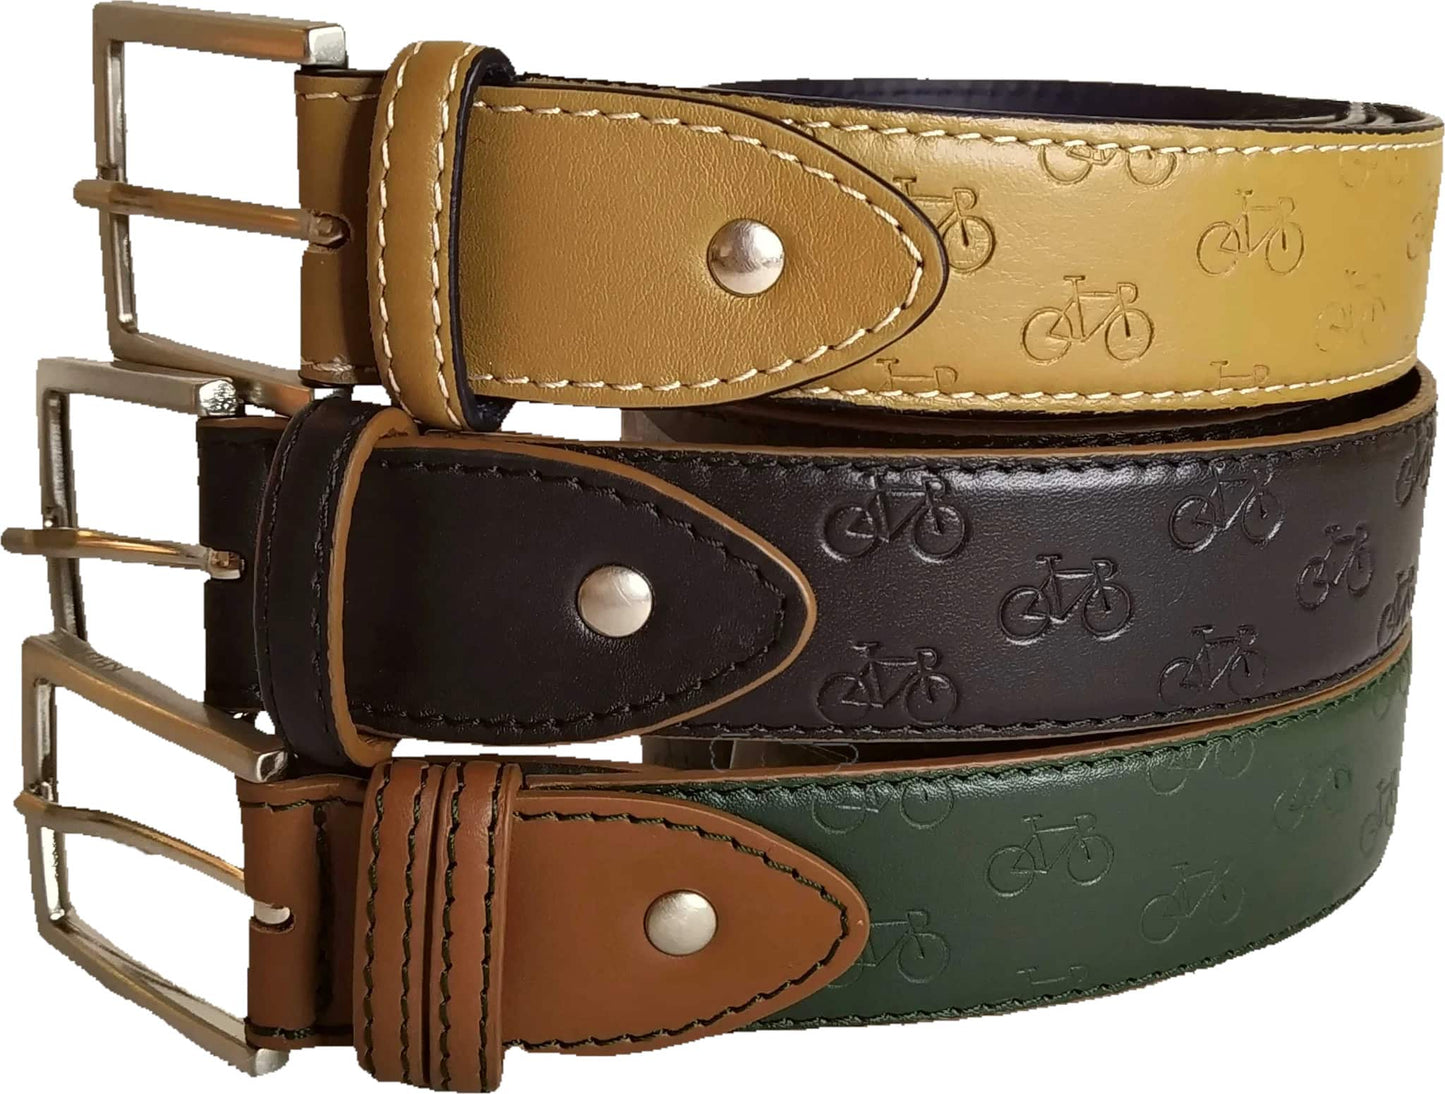 Leather belt with cycle pattern - Black